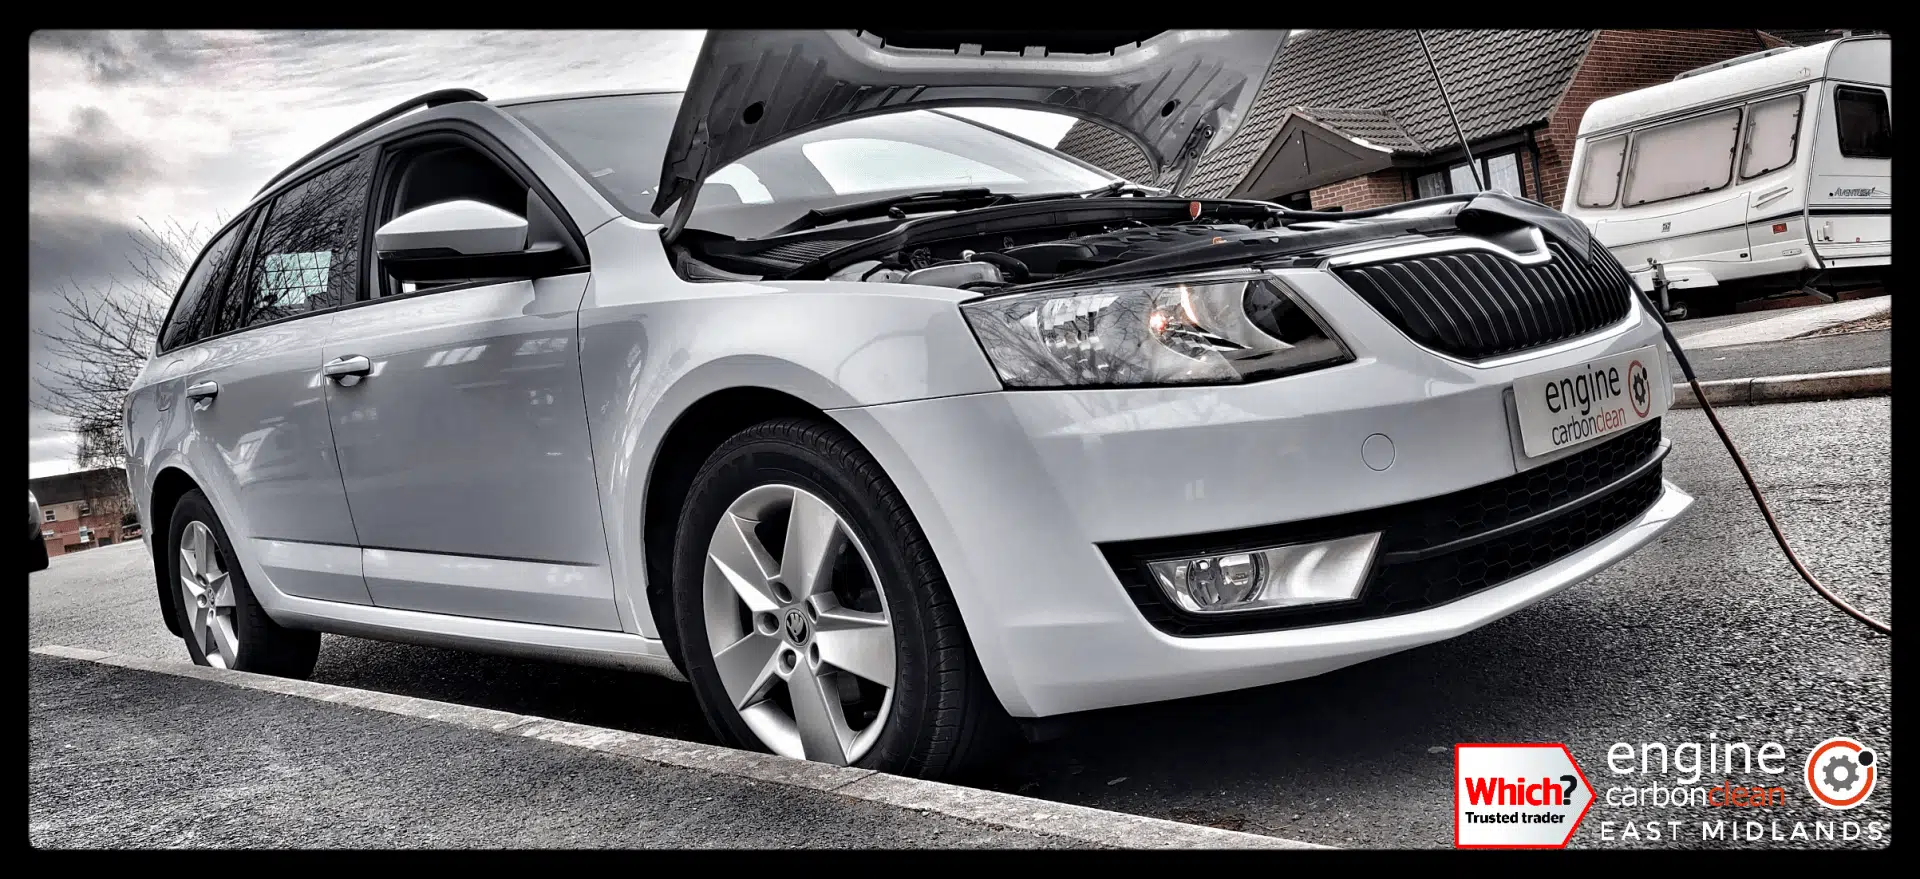 Diagnostic Consultation and Engine Carbon Clean on a Skoda Octavia 1.6 TDI (2016 - 75,482 miles)